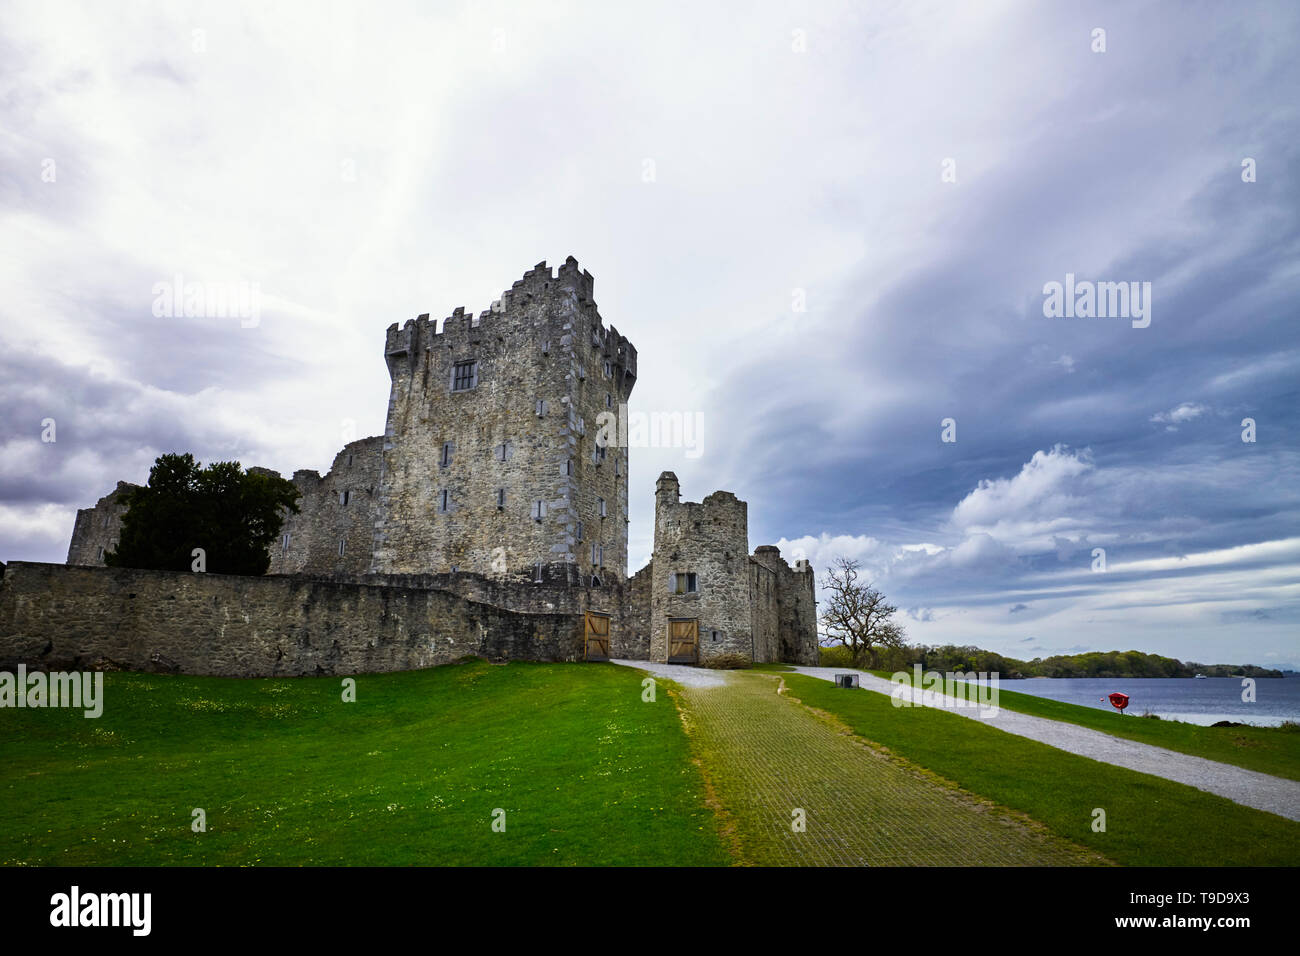 Looking up at the tower house of Ross Castle at Lough Leane, Killarney, Ireland Stock Photo